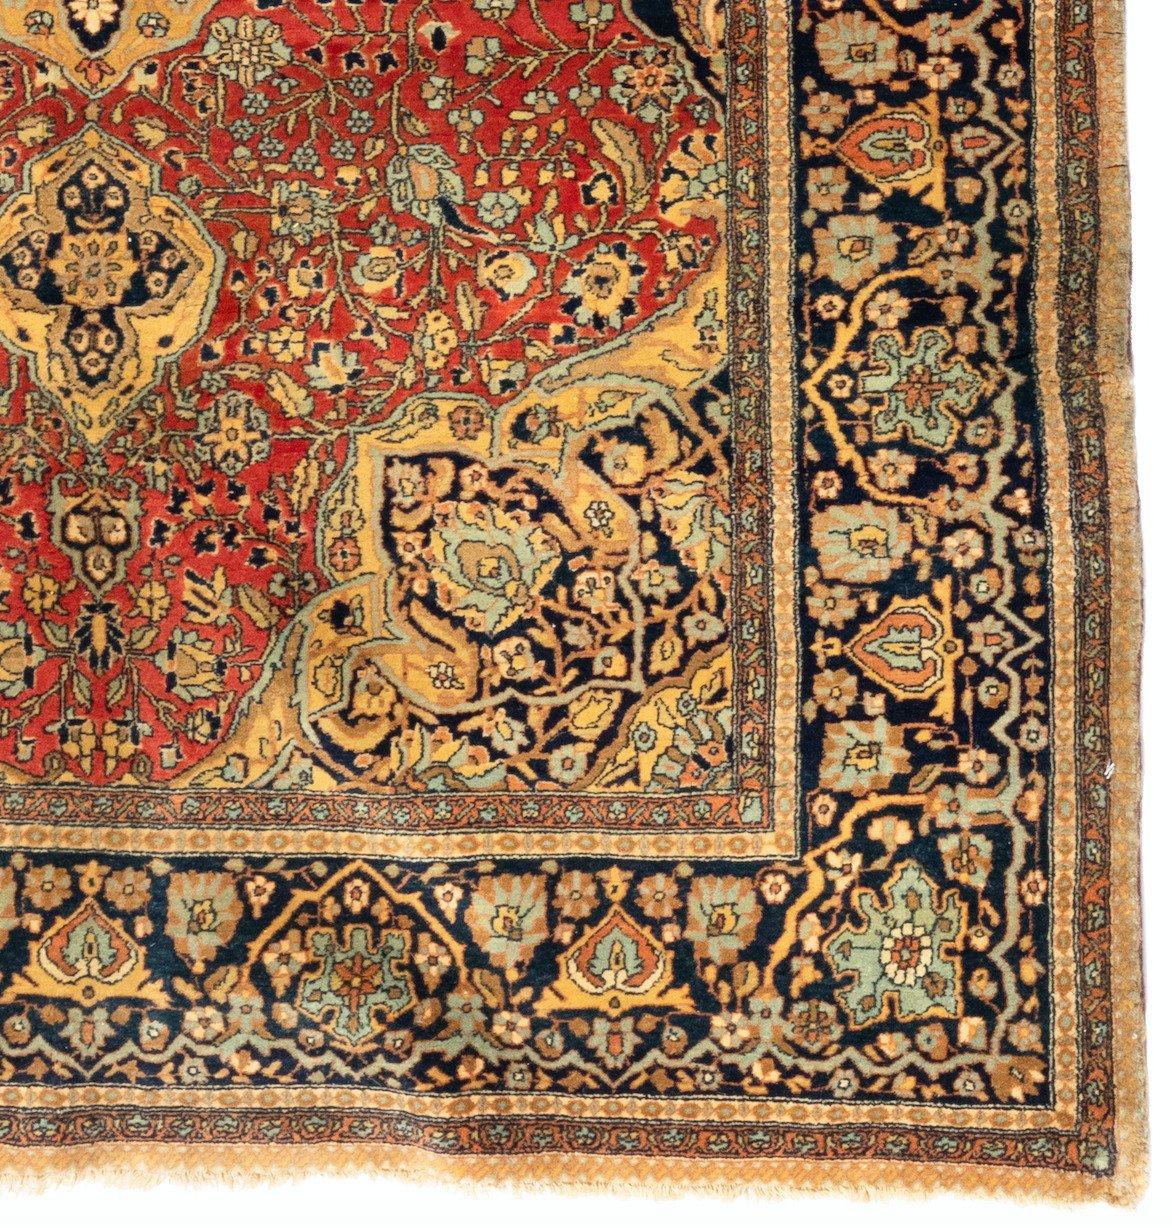 Antique Persian Red Light Blue Navy Blue Floral Mohtasham Kashan Rug circa 1880s In Excellent Condition For Sale In New York, NY